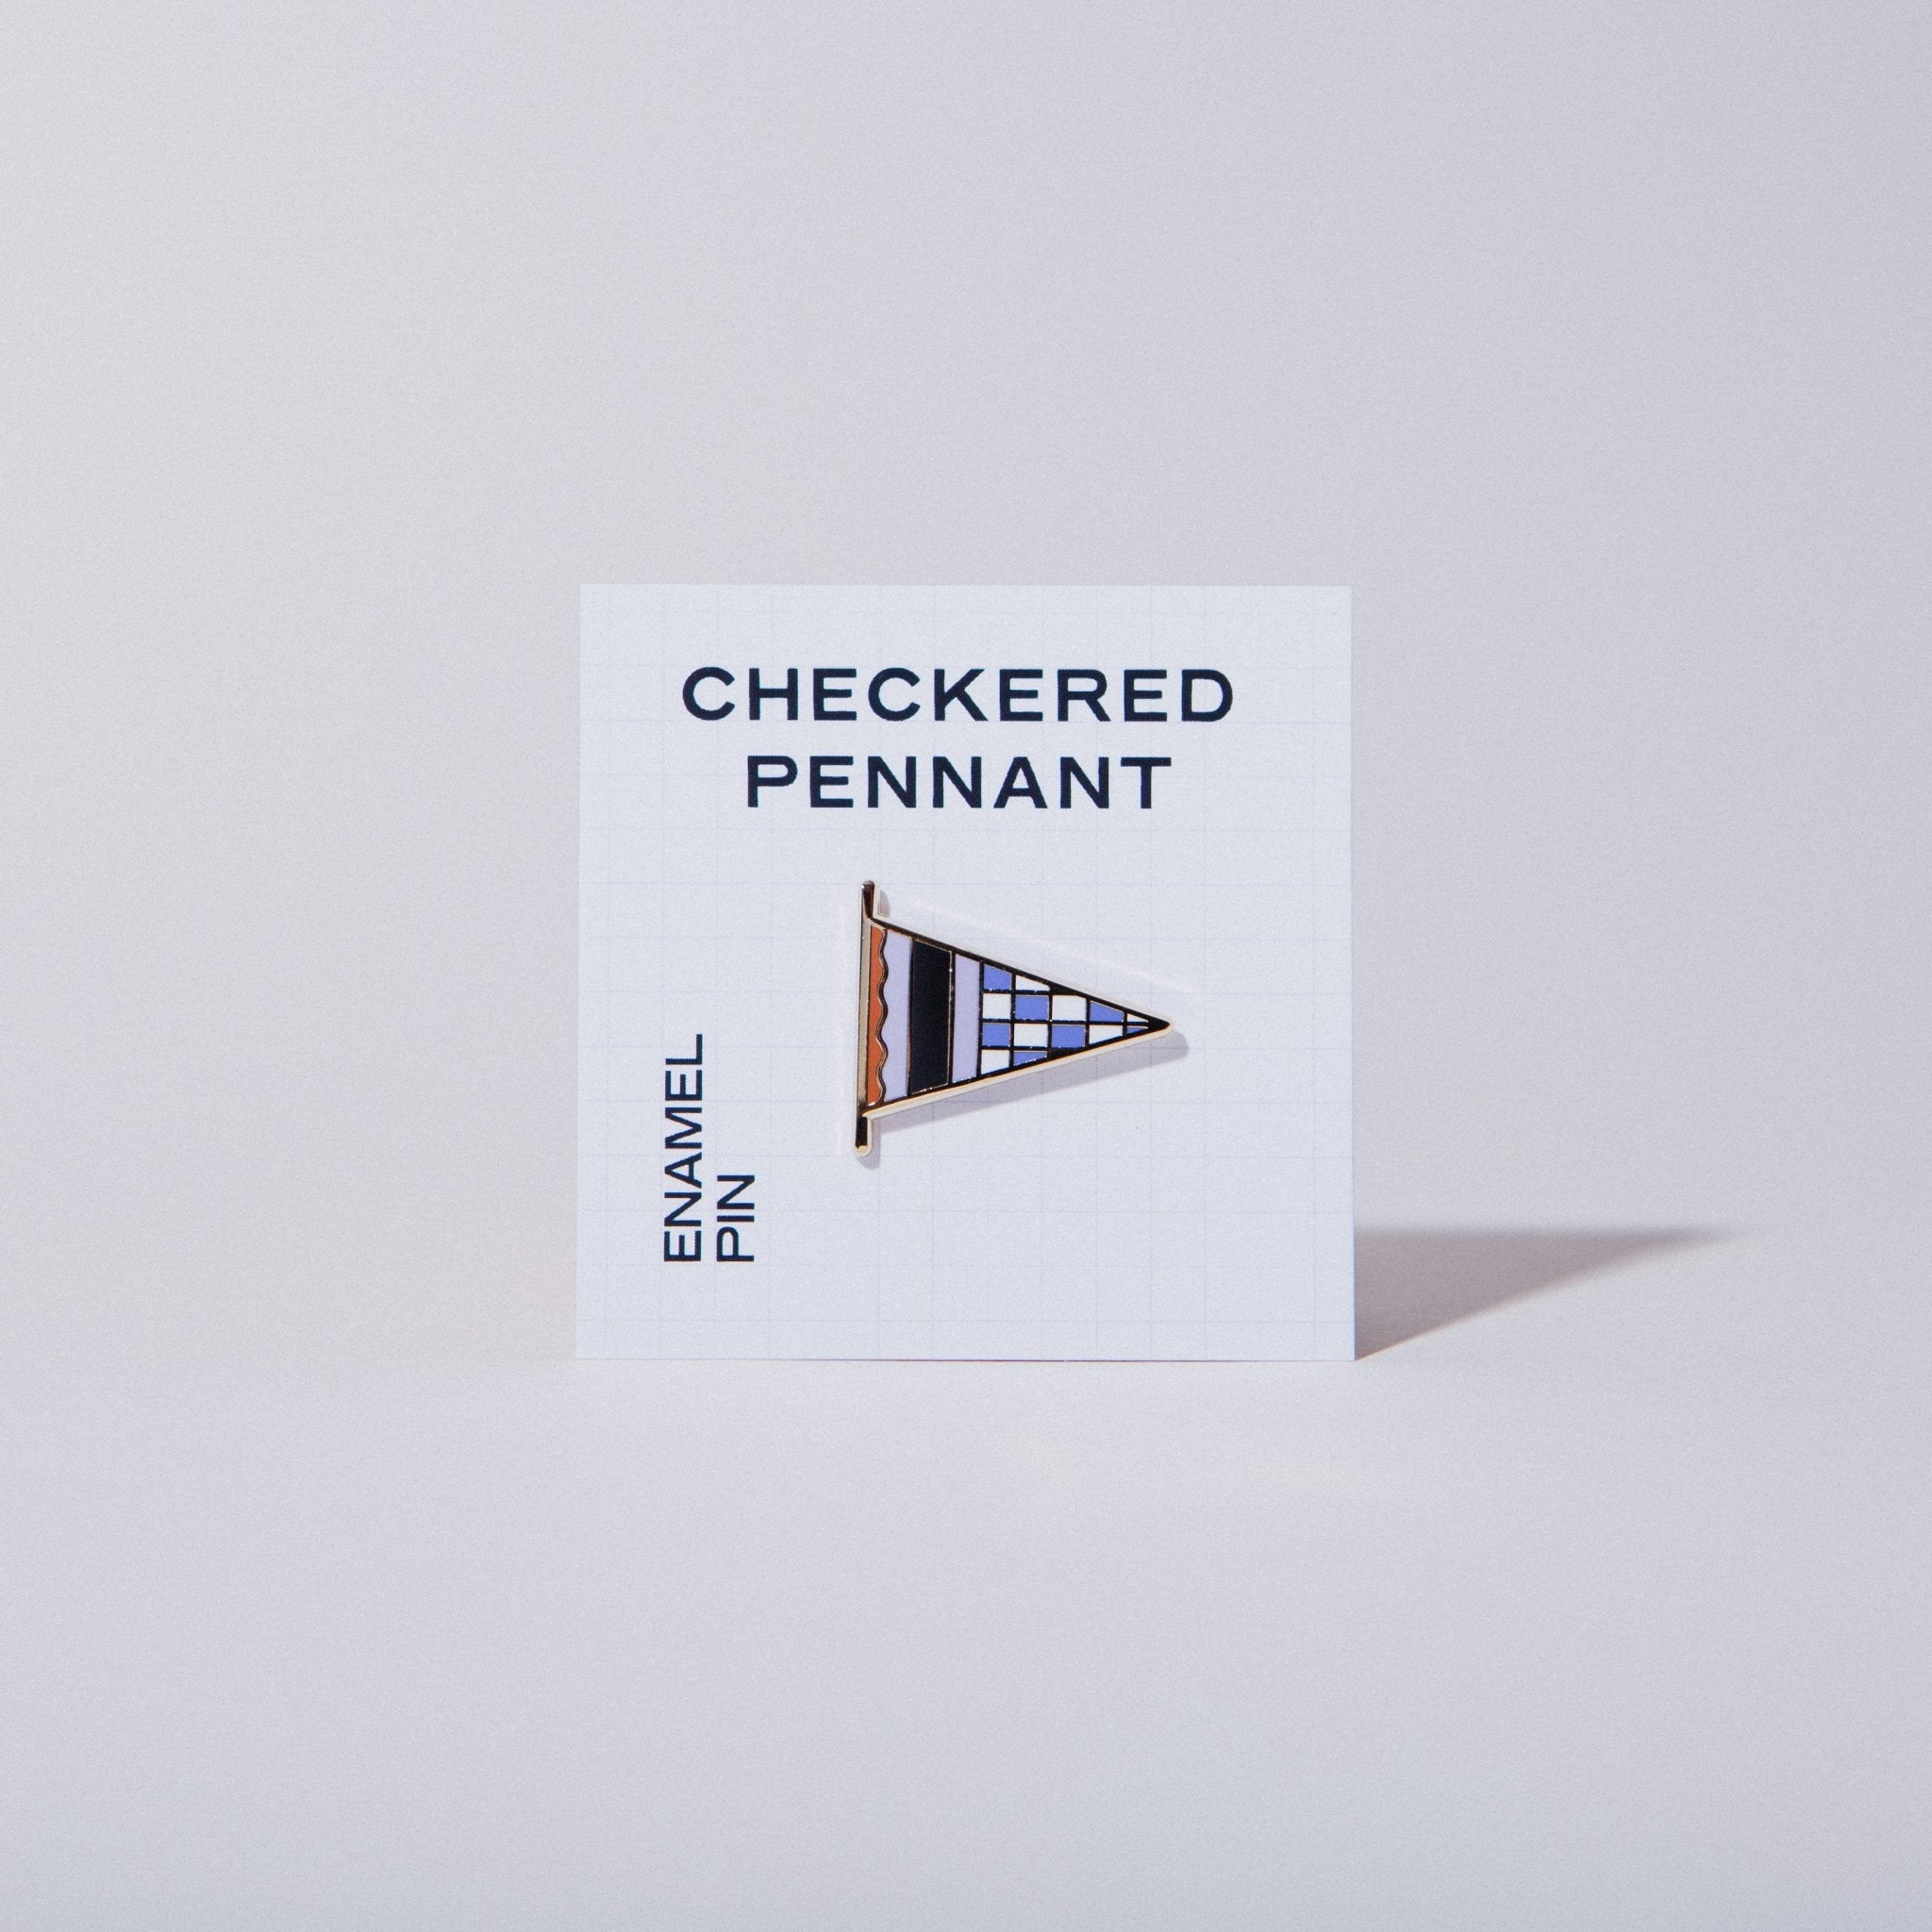 Checkered Pennant Pin - Case Study